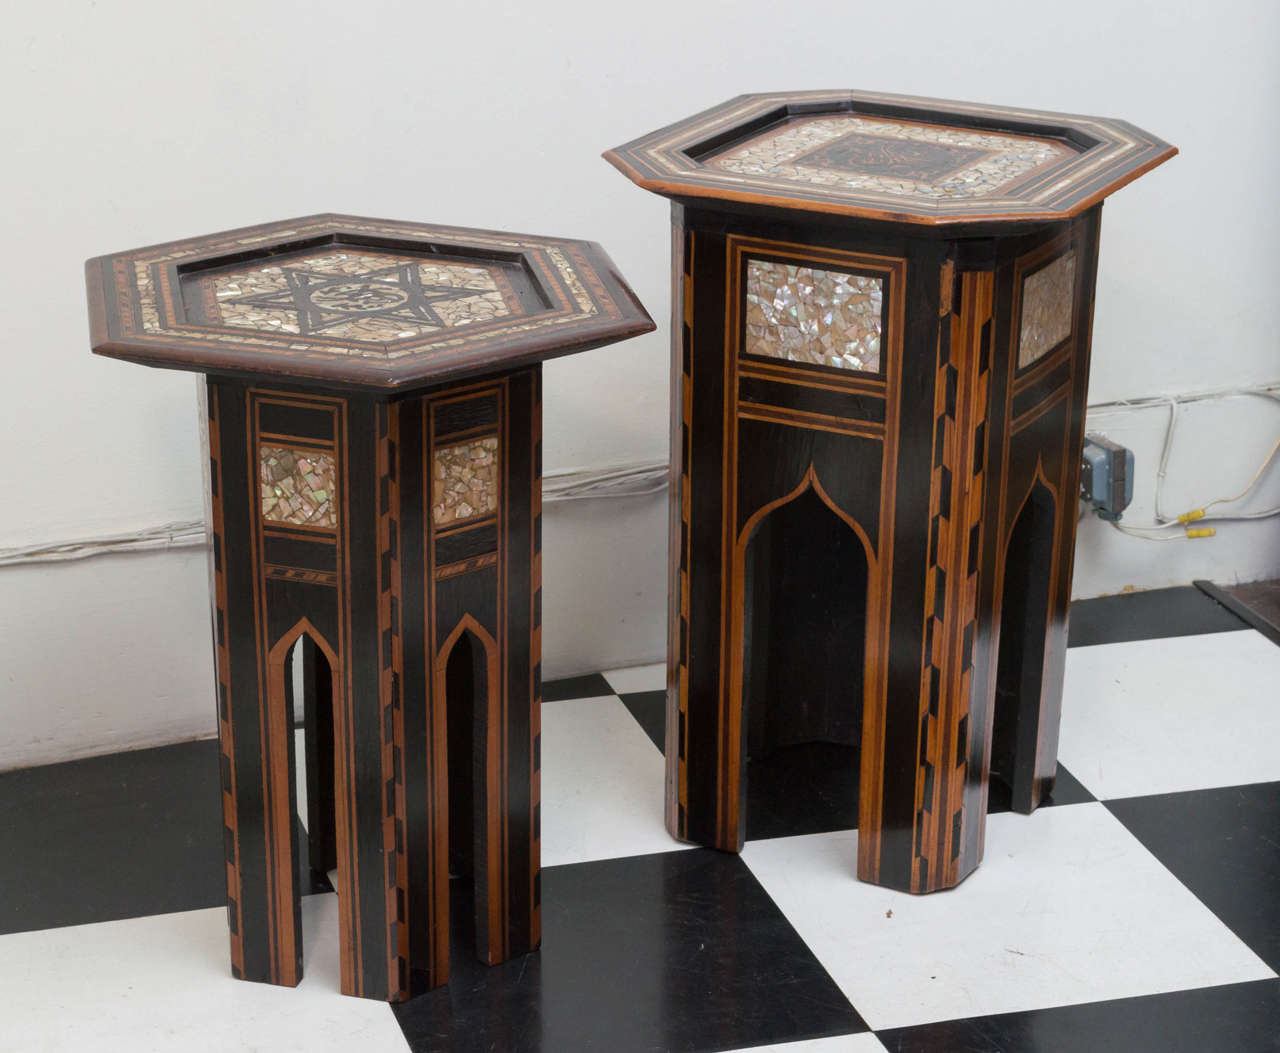 Pair of late 19th c. very fine inlaid Syrian taborets. Octagonal tops with fine inlay of woods and mother of pearl. Arched shaped side panels. Very closely detailed contrasting inlaid materials are visual and textural.